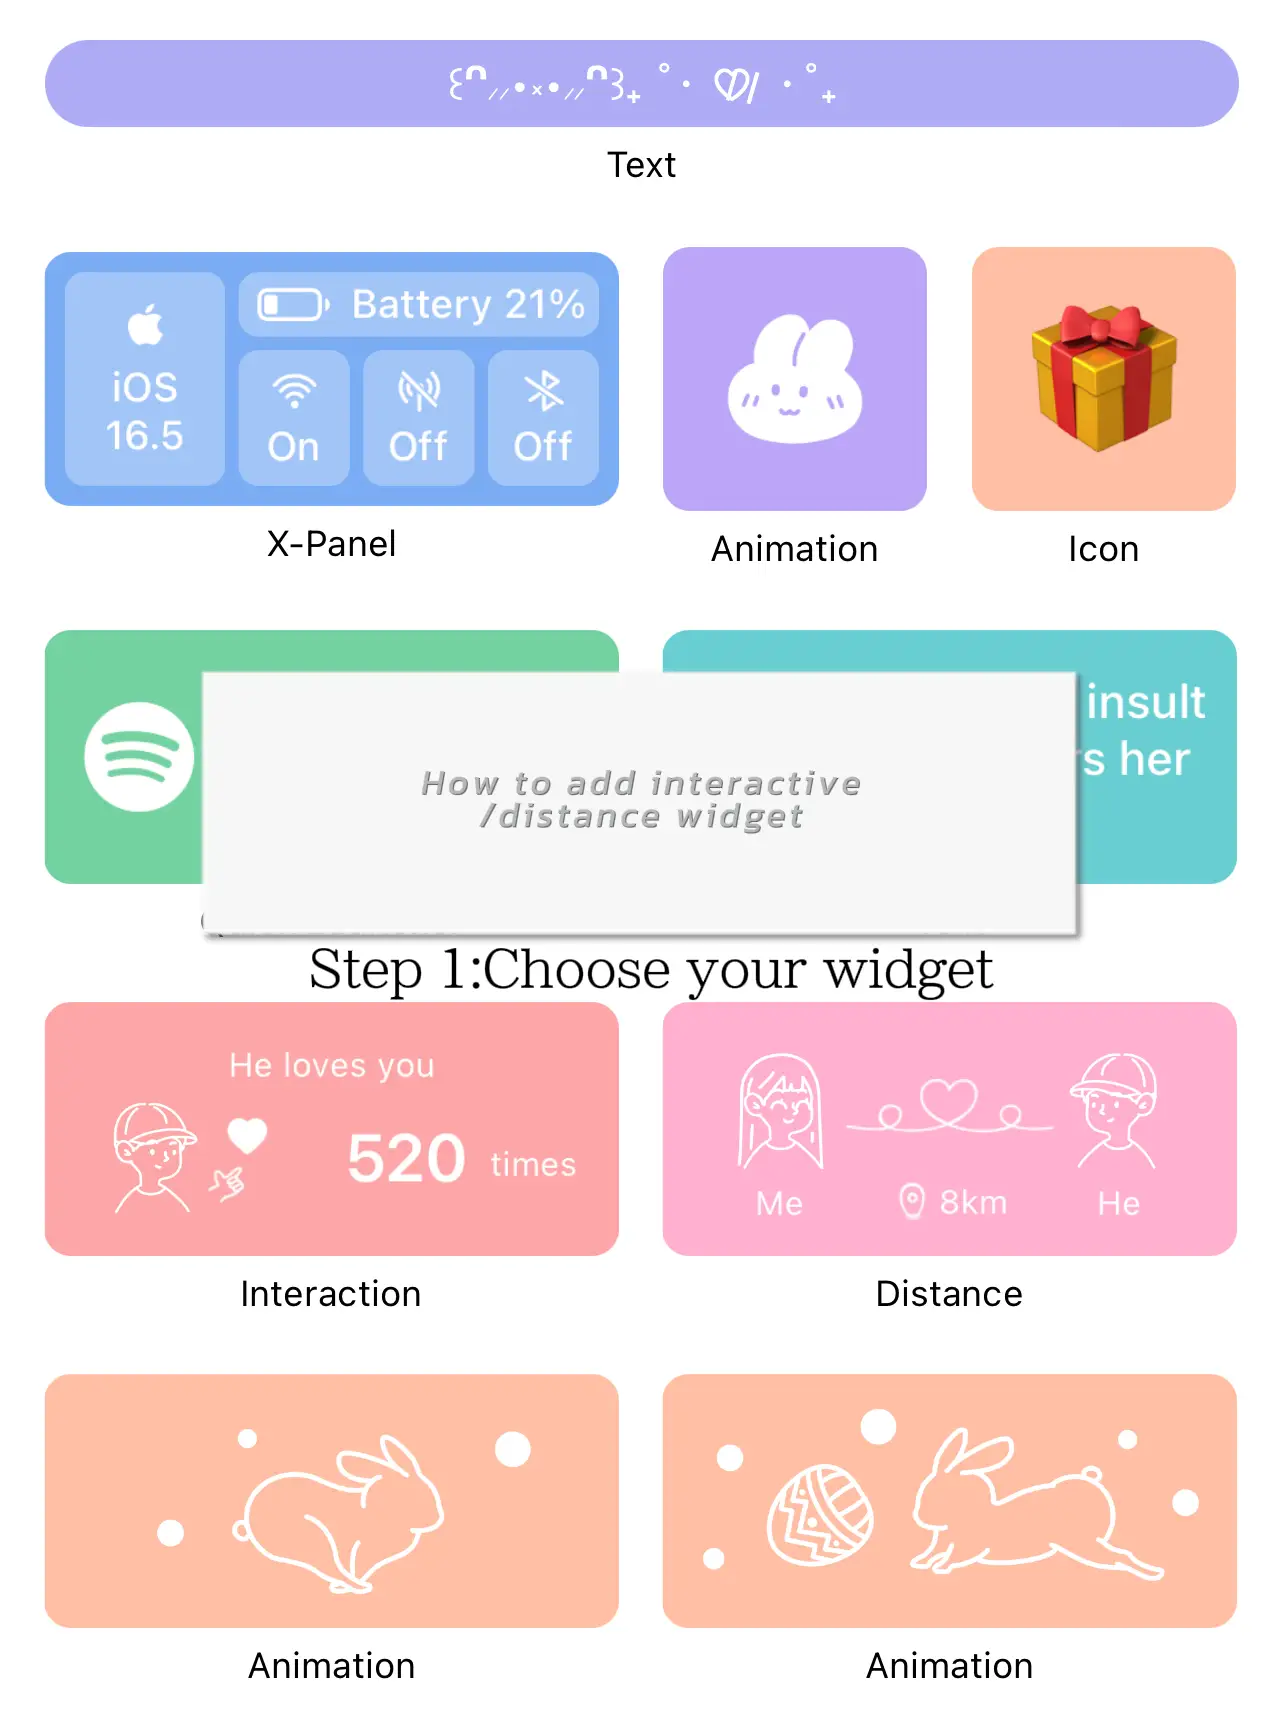 Locket Widget finally out for Android : r/LDR